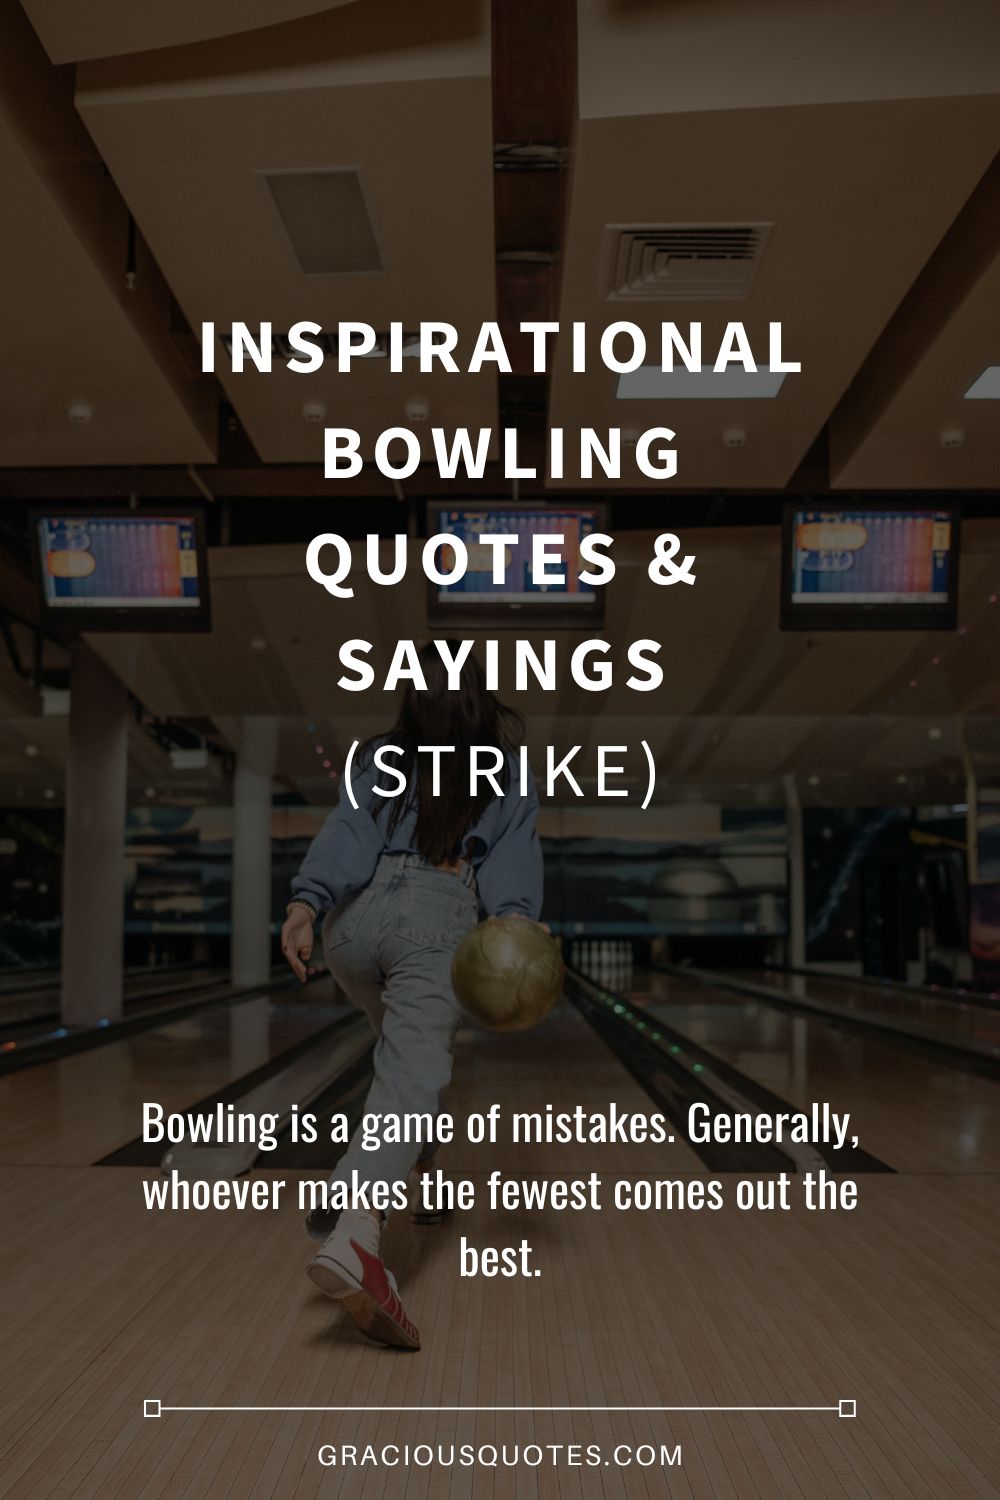 Inspirational Bowling Quotes & Sayings (STRIKE) - Gracious Quotes